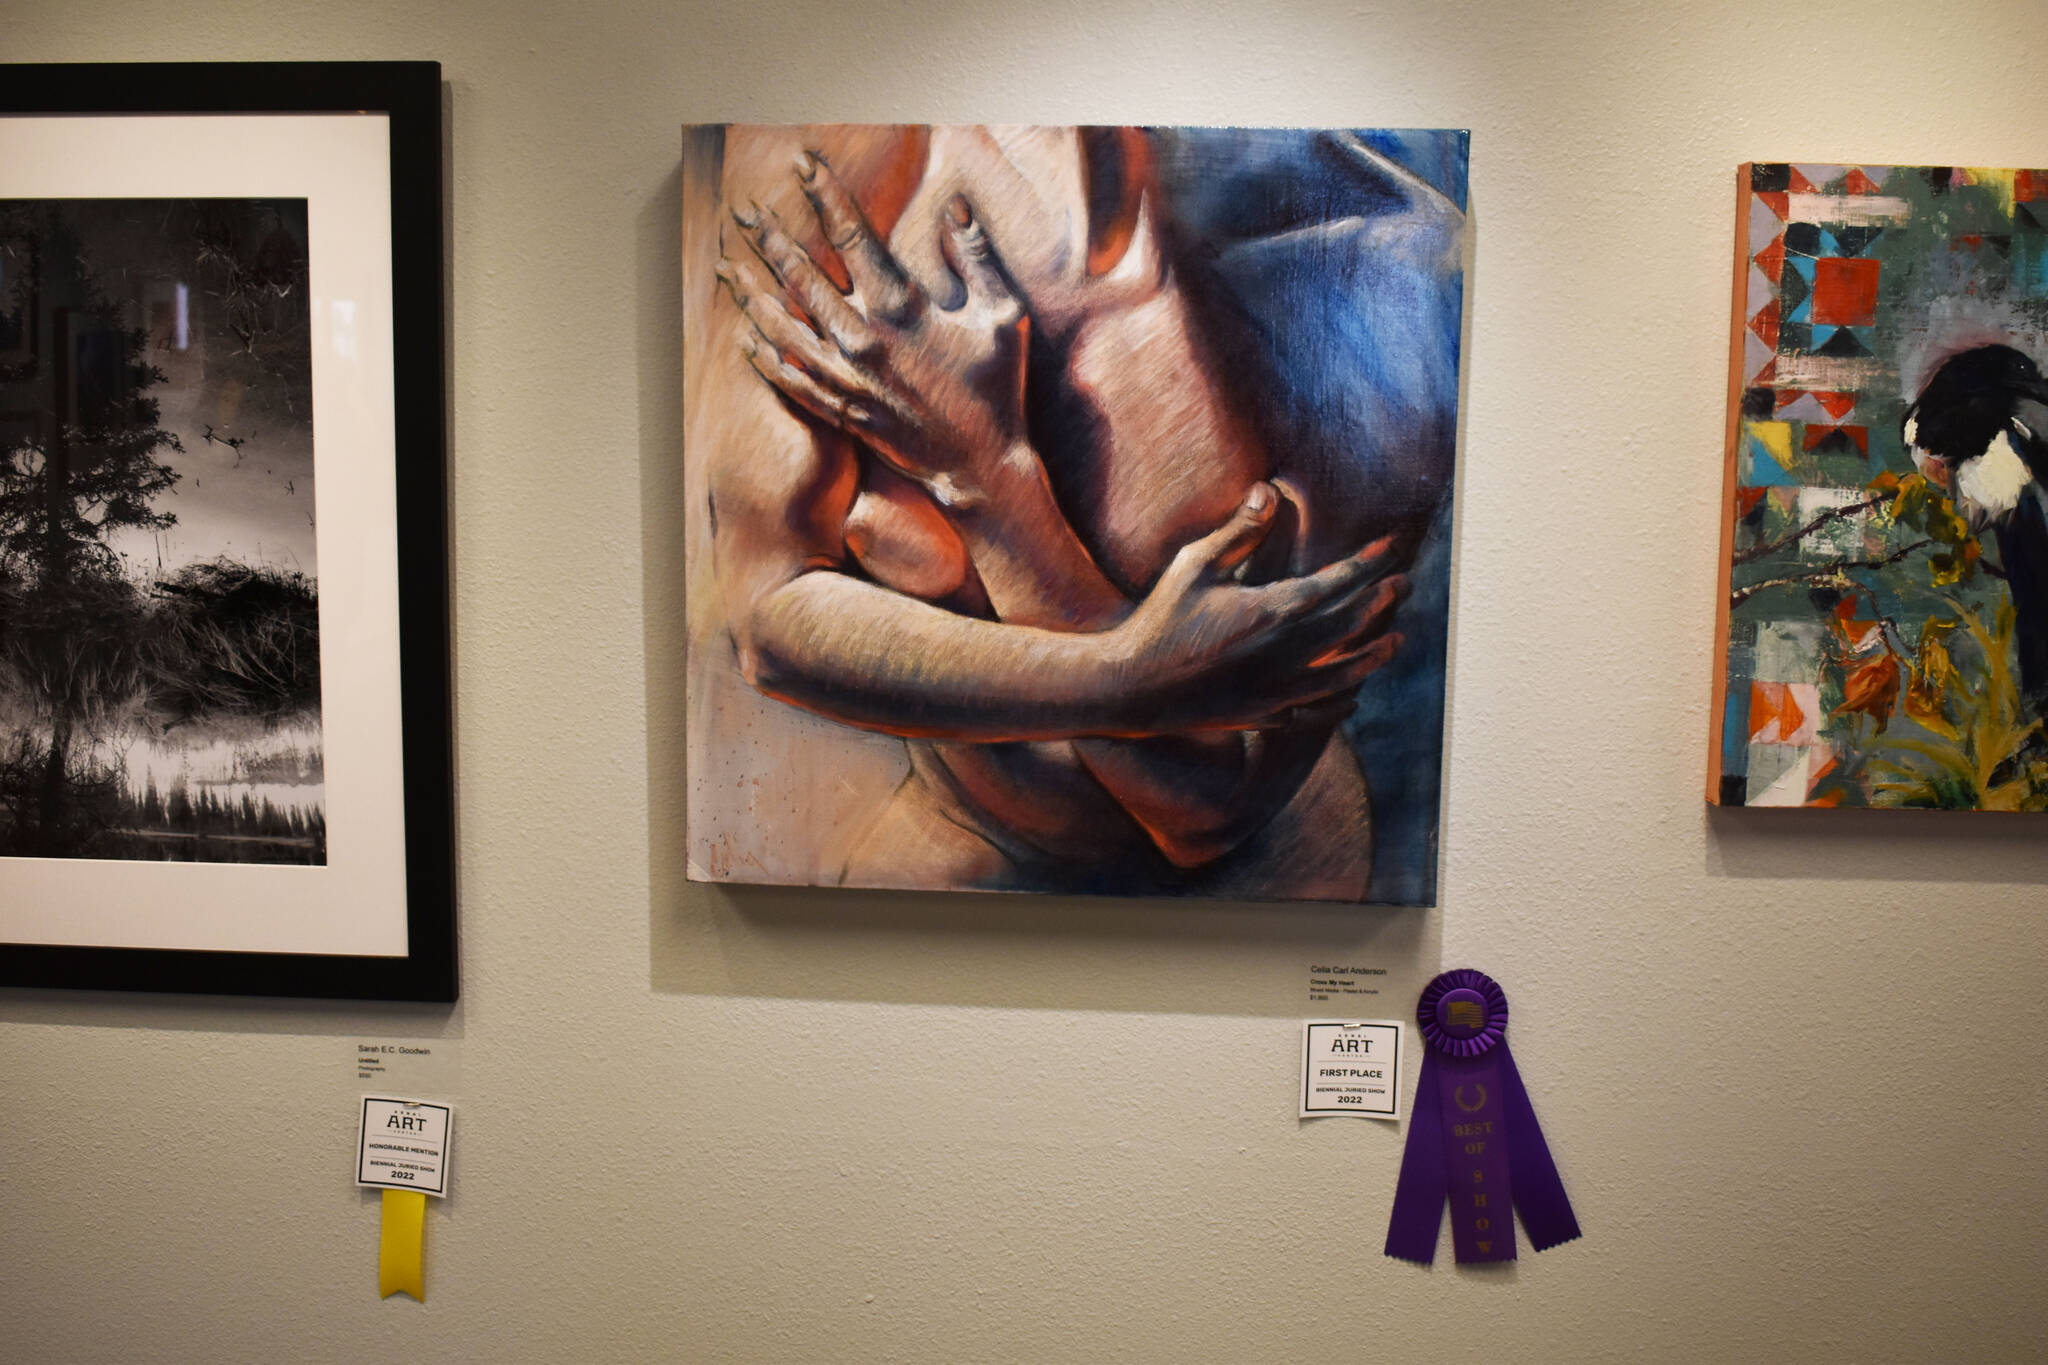 “Cross My Heart,” by Celia Carl Anderson, hangs with its Best of Show ribbon during the opening reception of the Kenai Art Center Biennial Juried Show on Thursday, Oct. 6, 2022, at the Kenai Art Center in Kenai, Alaska. (Jake Dye/Peninsula Clarion)